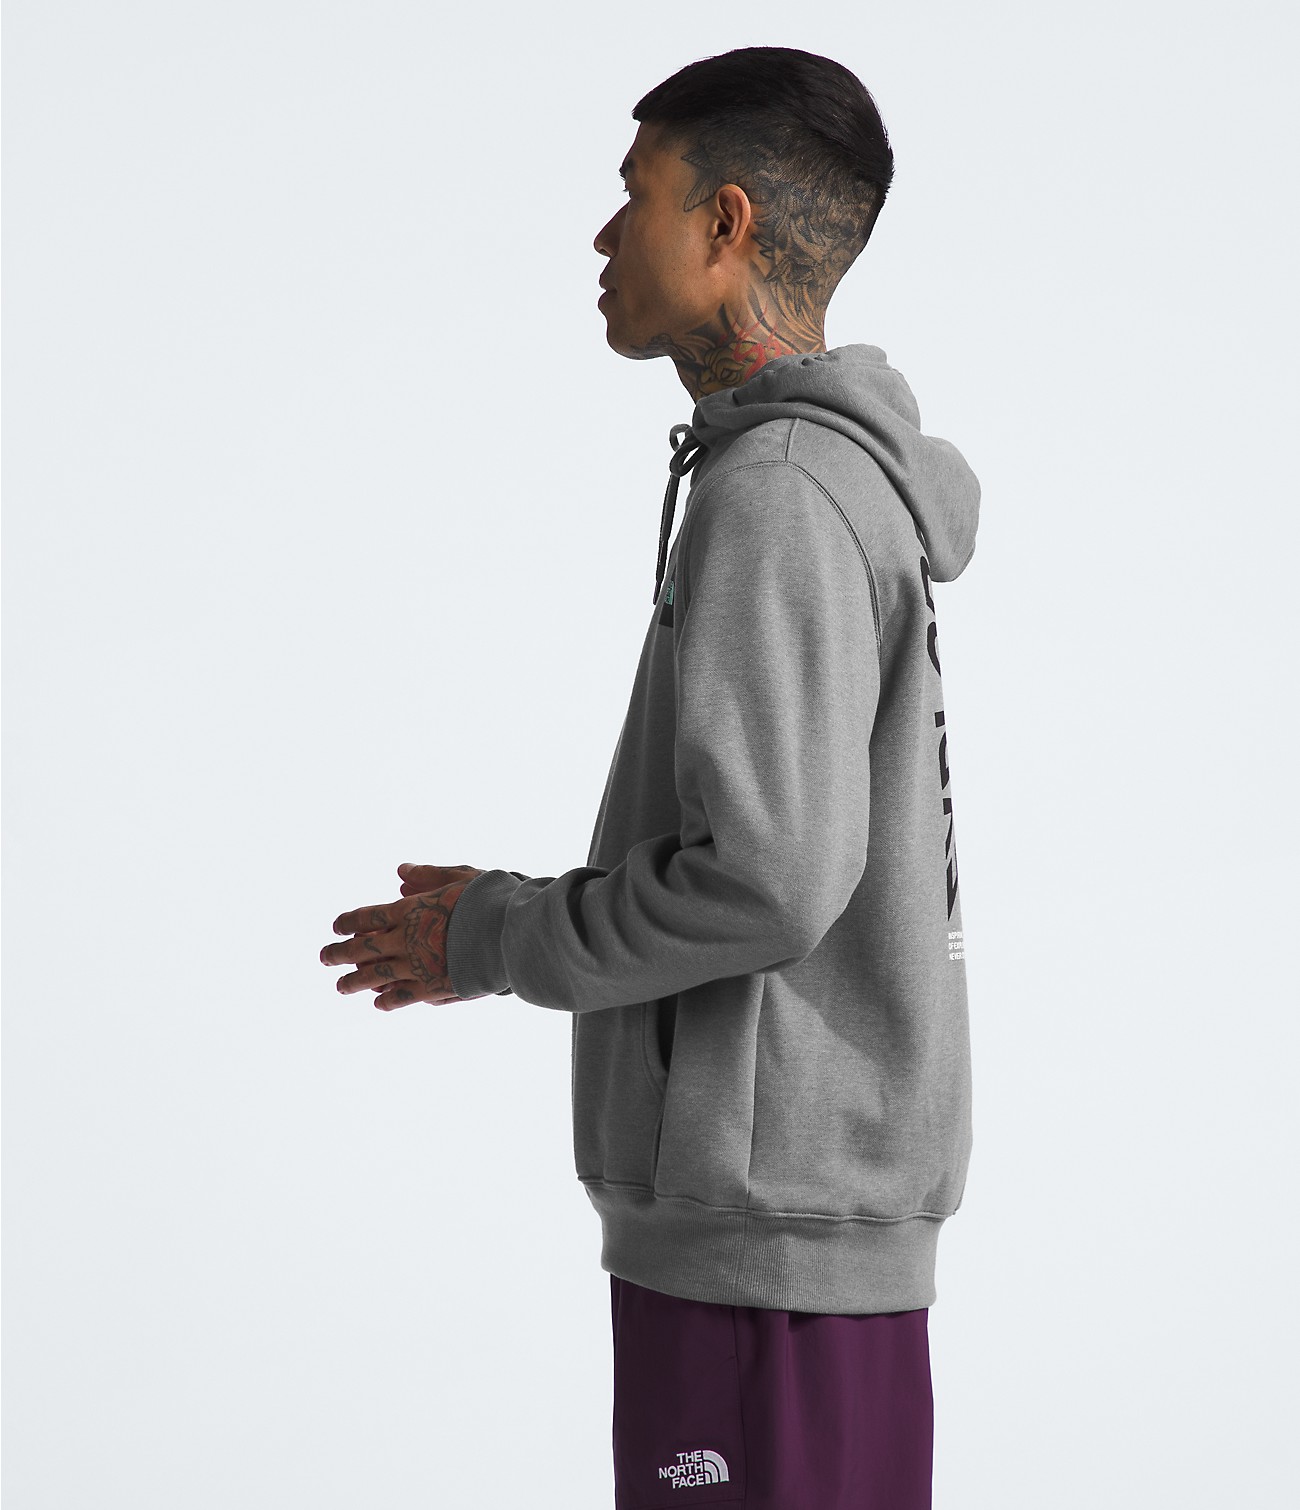 Men’s Brand Proud Hoodie | The North Face